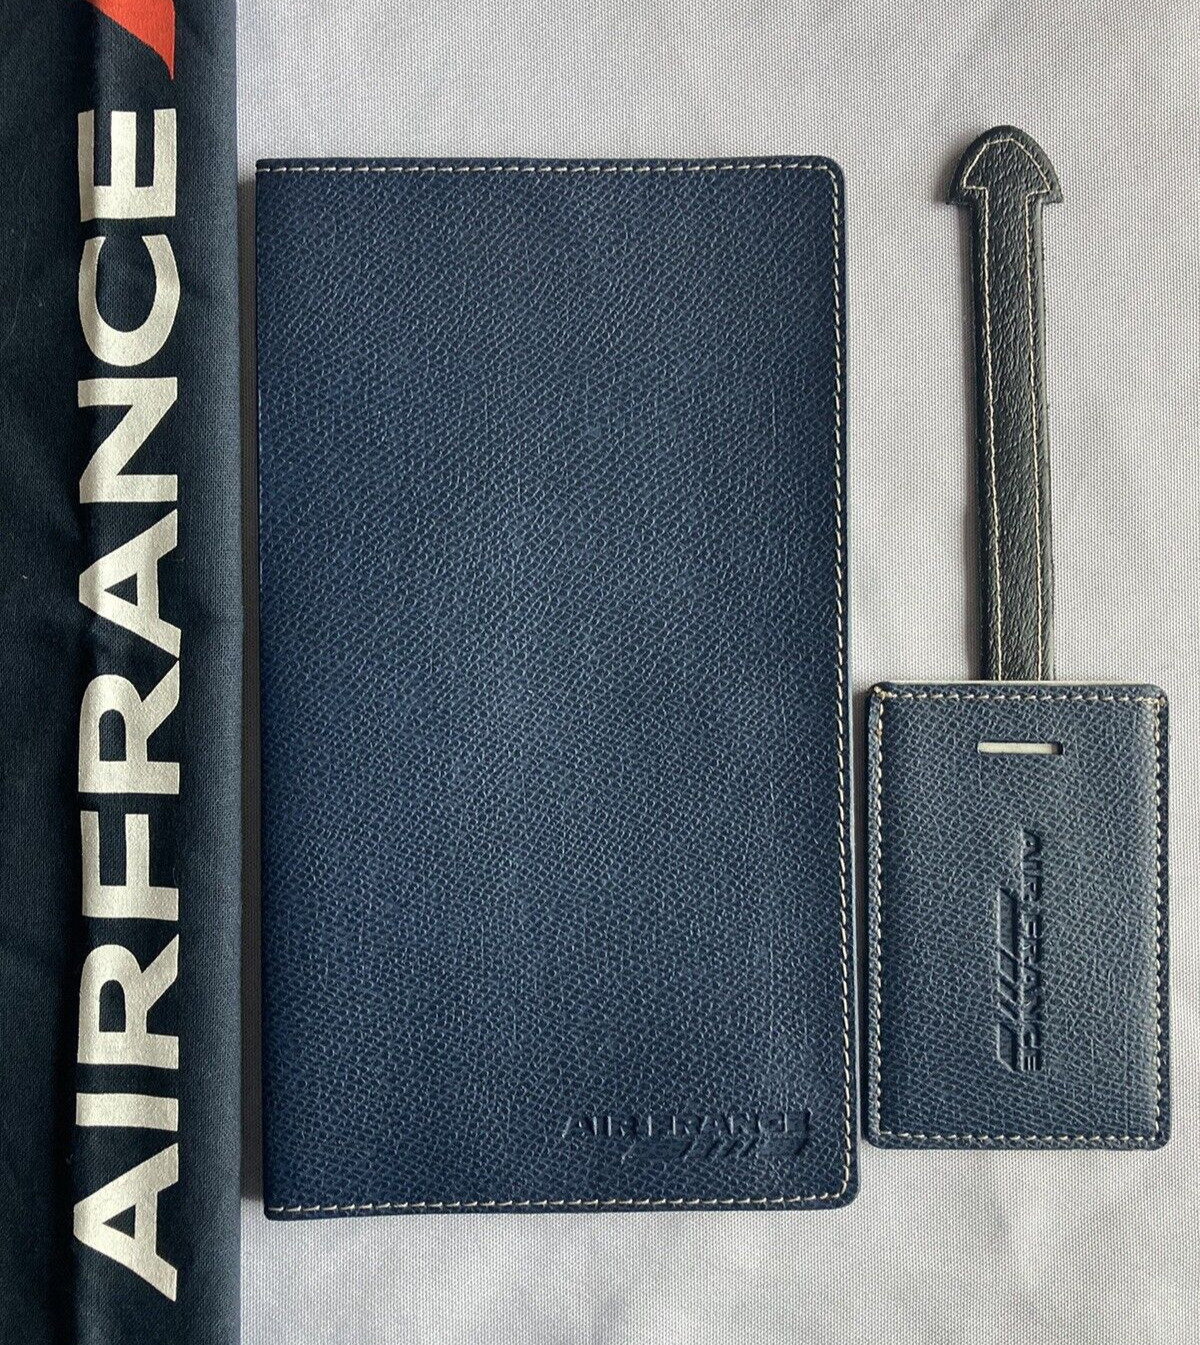 AIR FRANCE AIRPLANE LUGGAGE TAG and TICKET/PASSPORT HOLDER